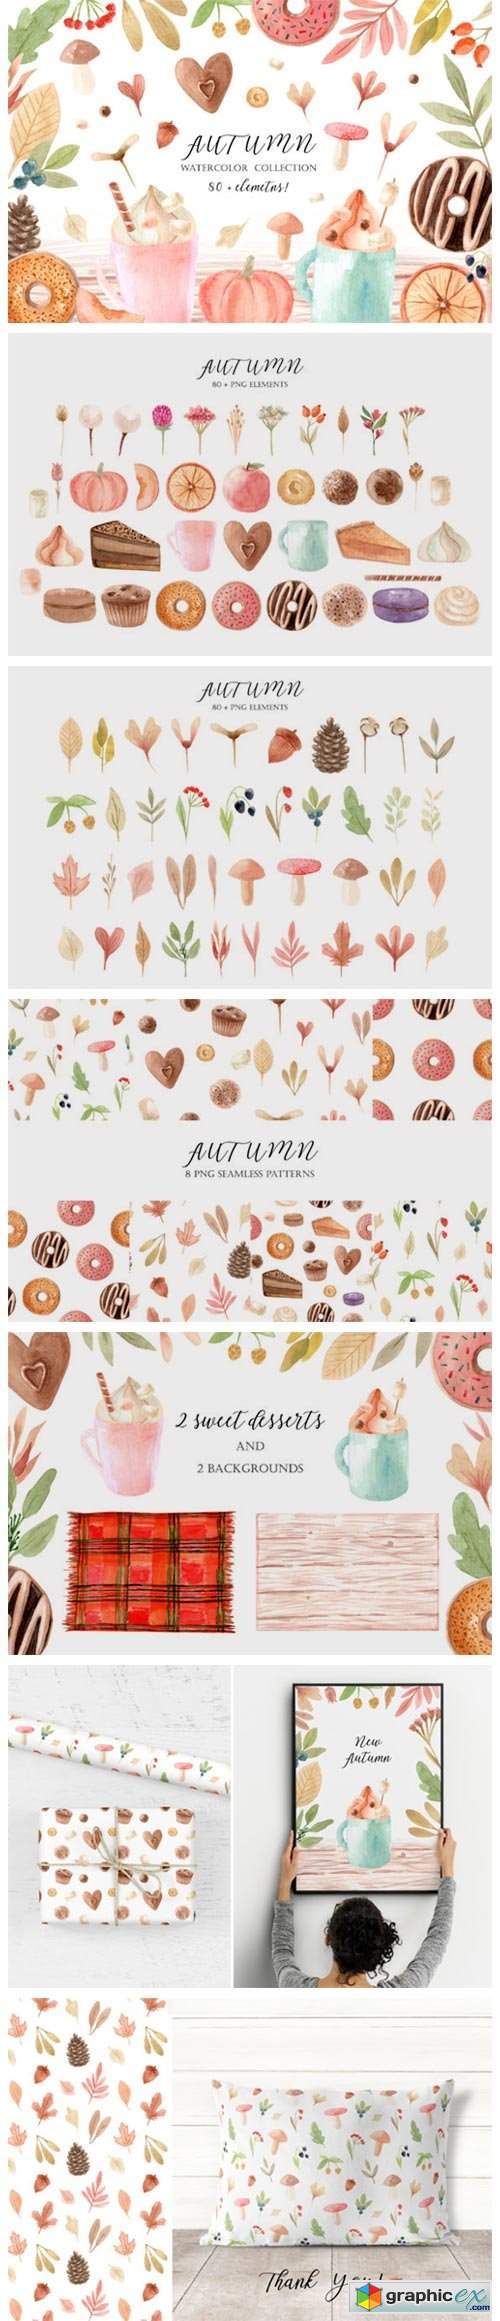 Watercolor Autumn Clipart Collection